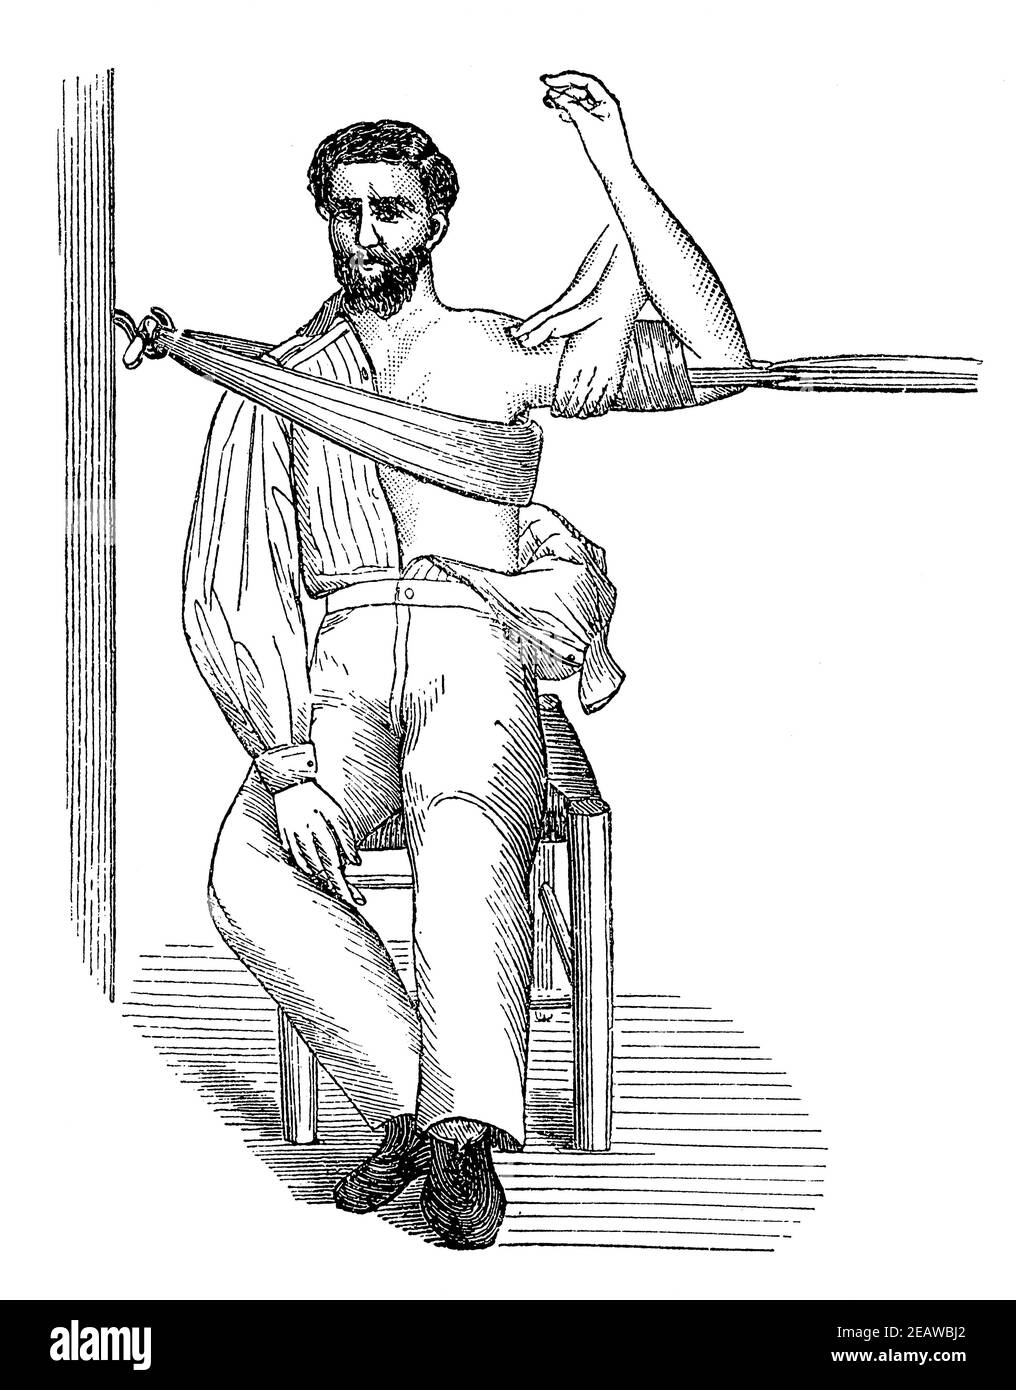 Surgeon's devices for dislocating the shoulder. Illustration of the 19th century. Germany. White background. Stock Photo